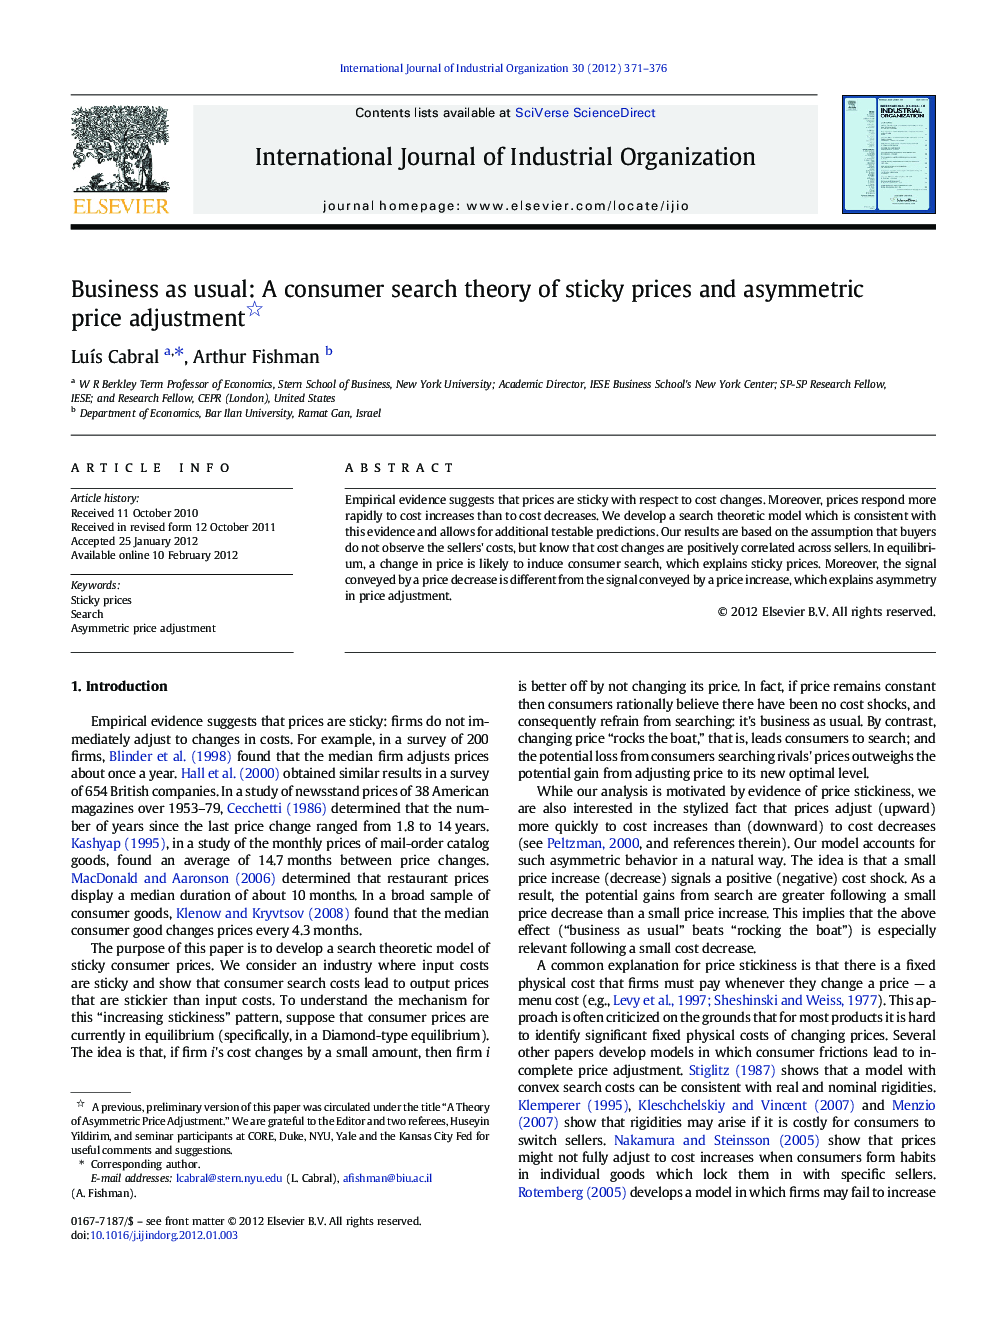 Business as usual: A consumer search theory of sticky prices and asymmetric price adjustment